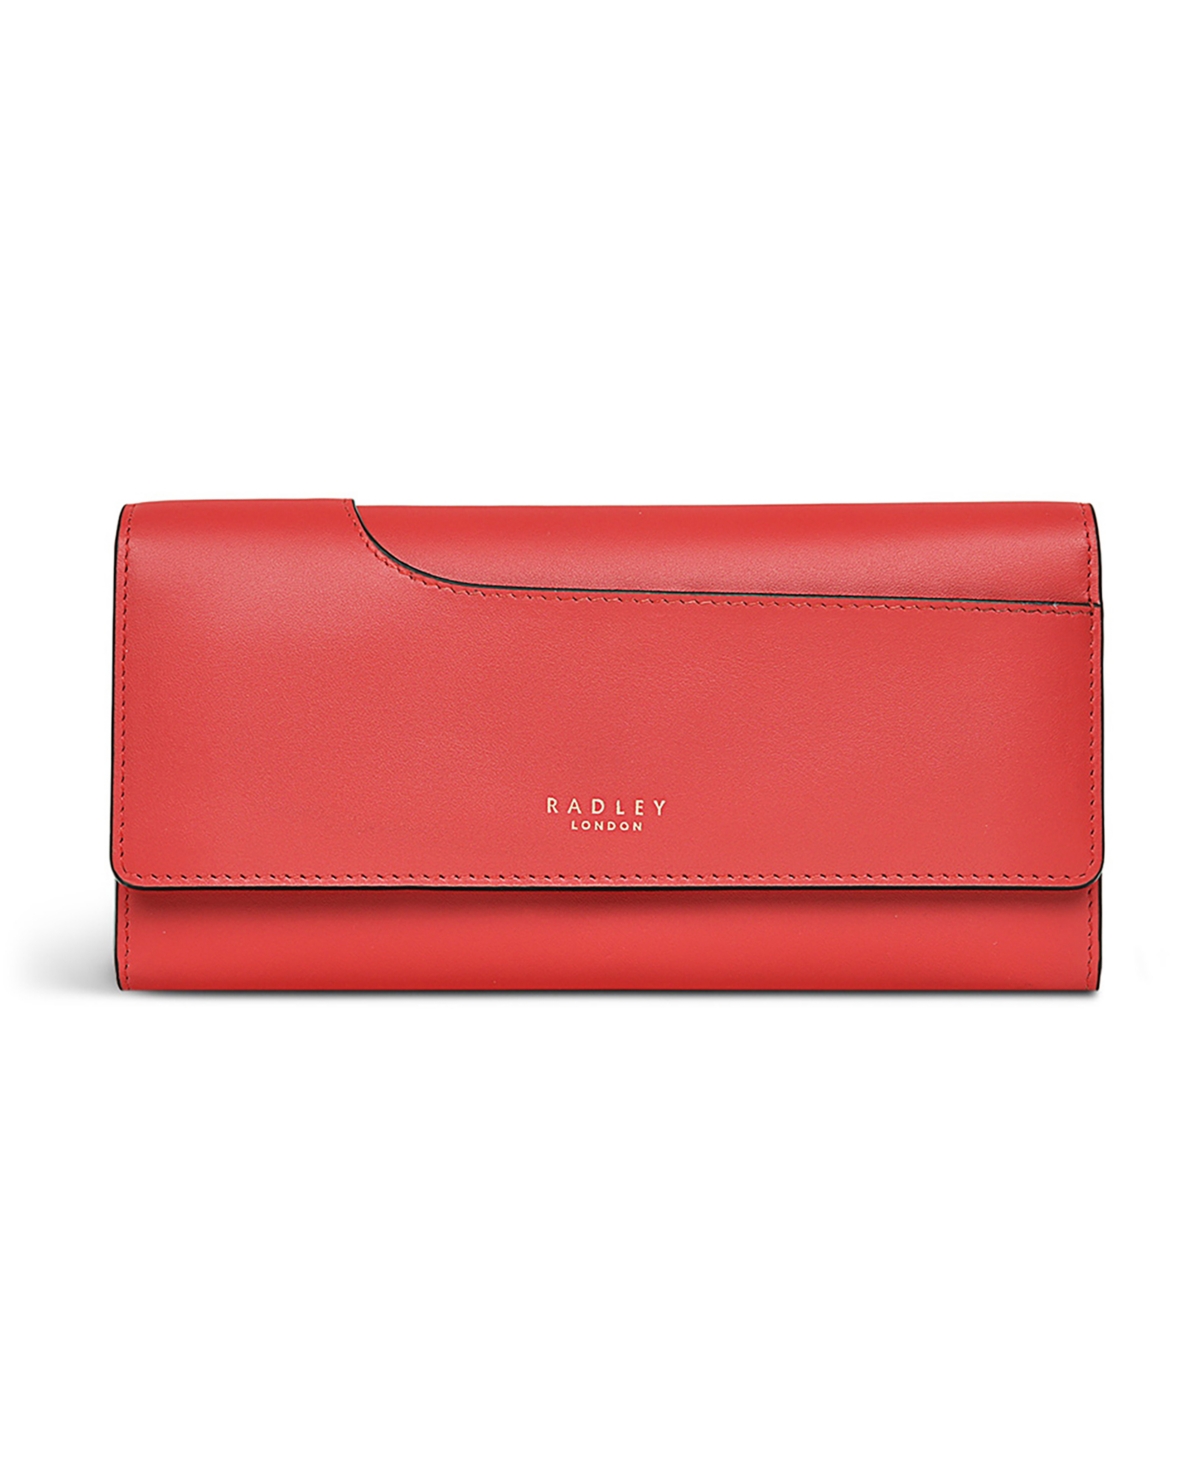 Radley London Pockets 2.0 Leather Mini Flapover Wallet In Begonia